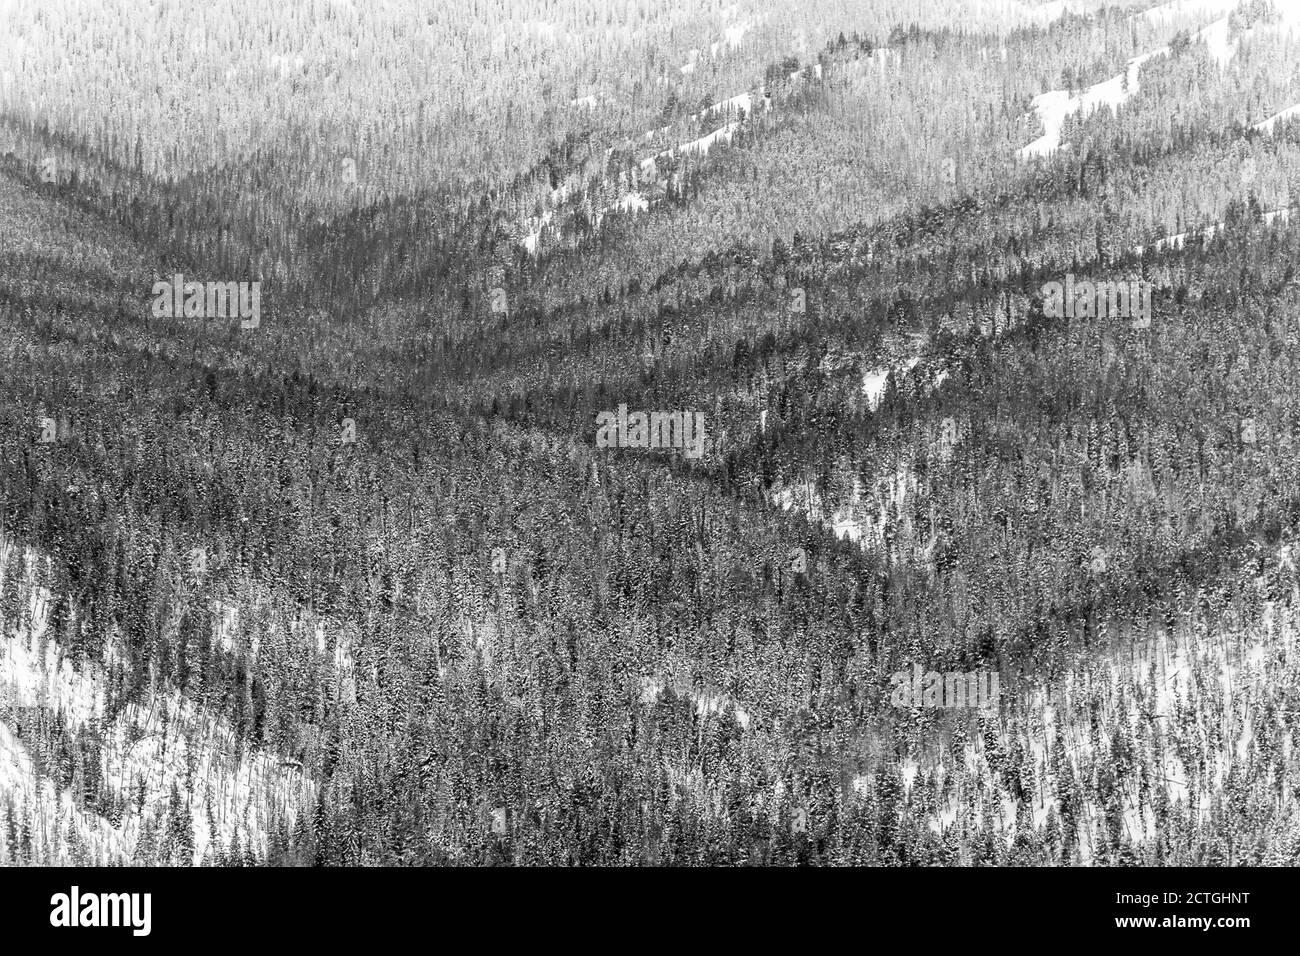 Pine forest on mountain slopes in the Lamar valley during winter, Black and White, Yellowstone national park, Wyoming, Montana, USA Stock Photo